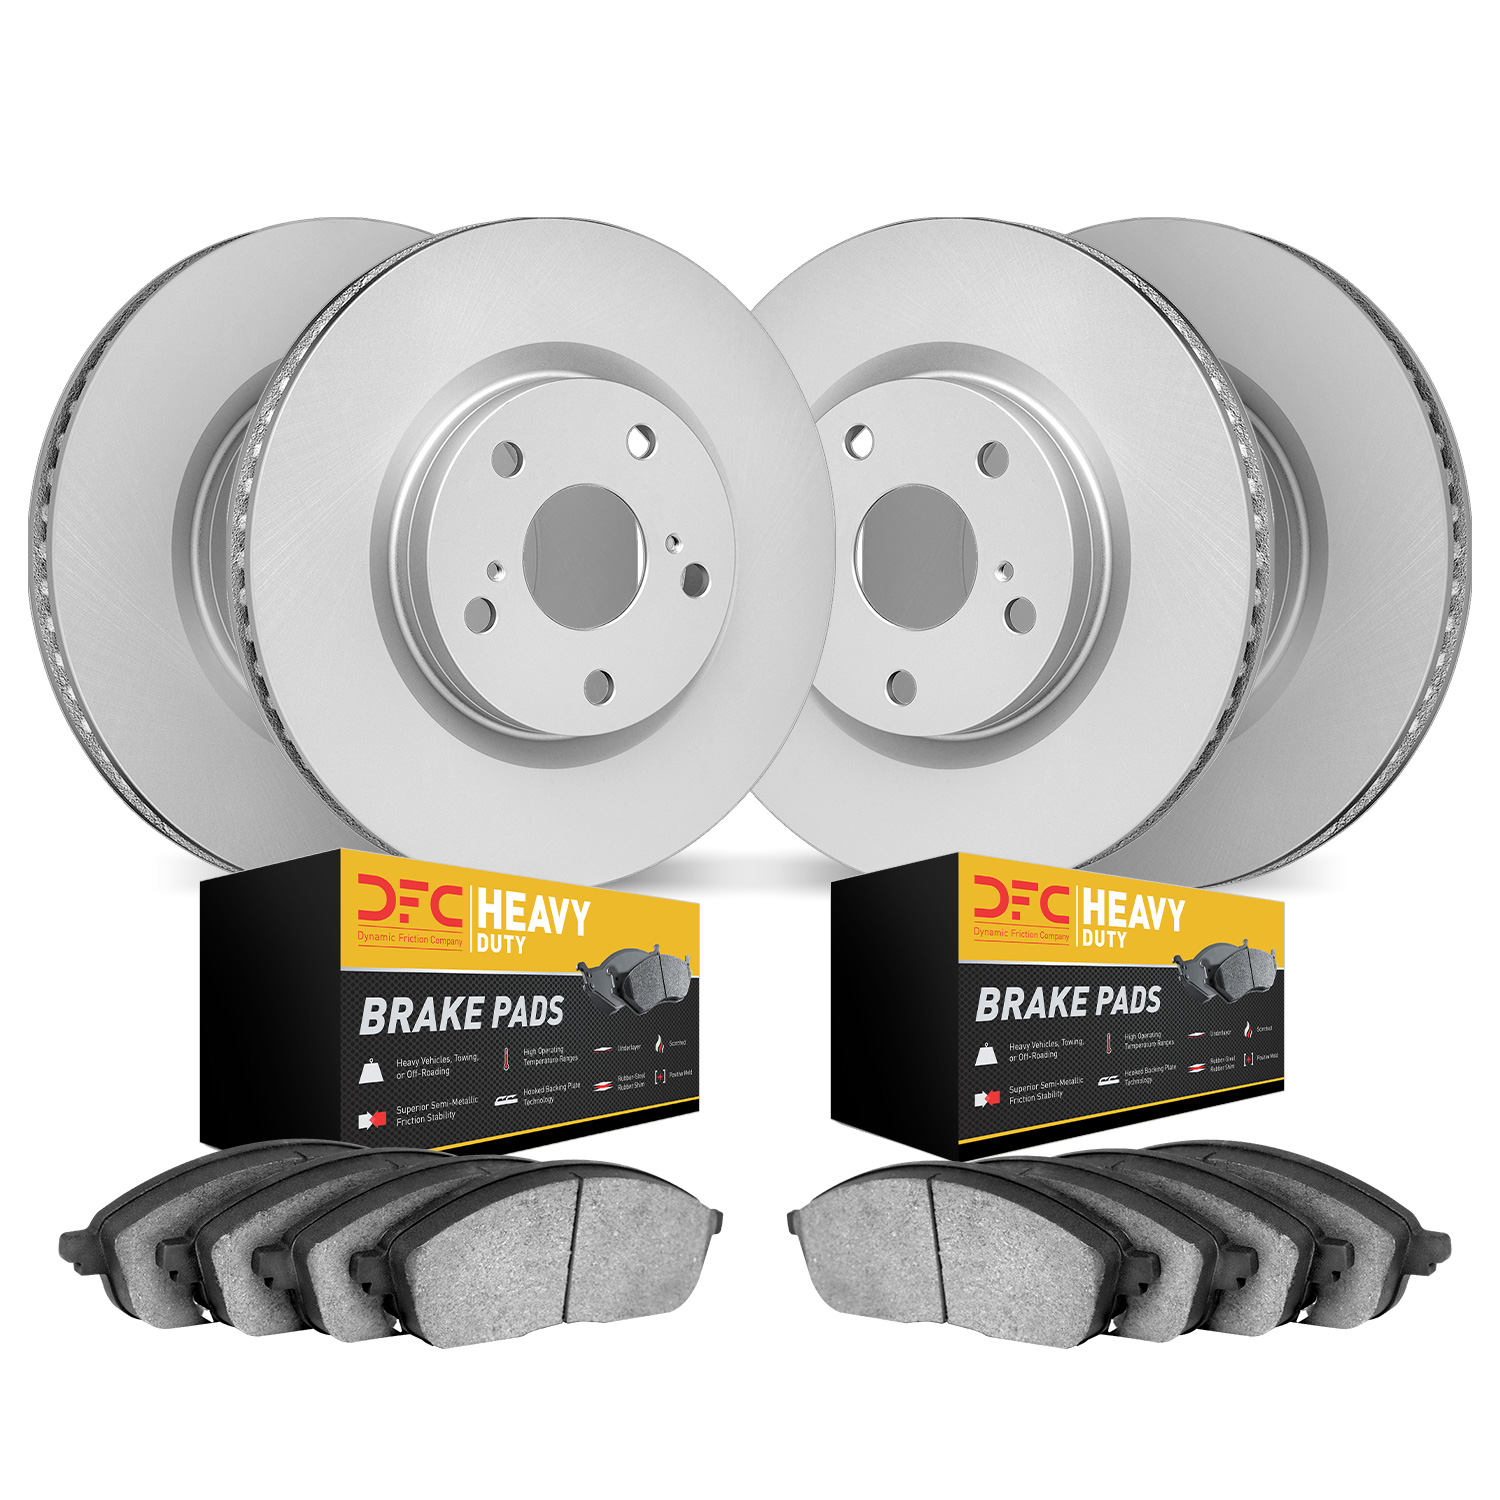 4204-56014 Geospec Brake Rotors w/Heavy-Duty Brake Pads Kit, 2003-2011 Ford/Lincoln/Mercury/Mazda, Position: Front and Rear